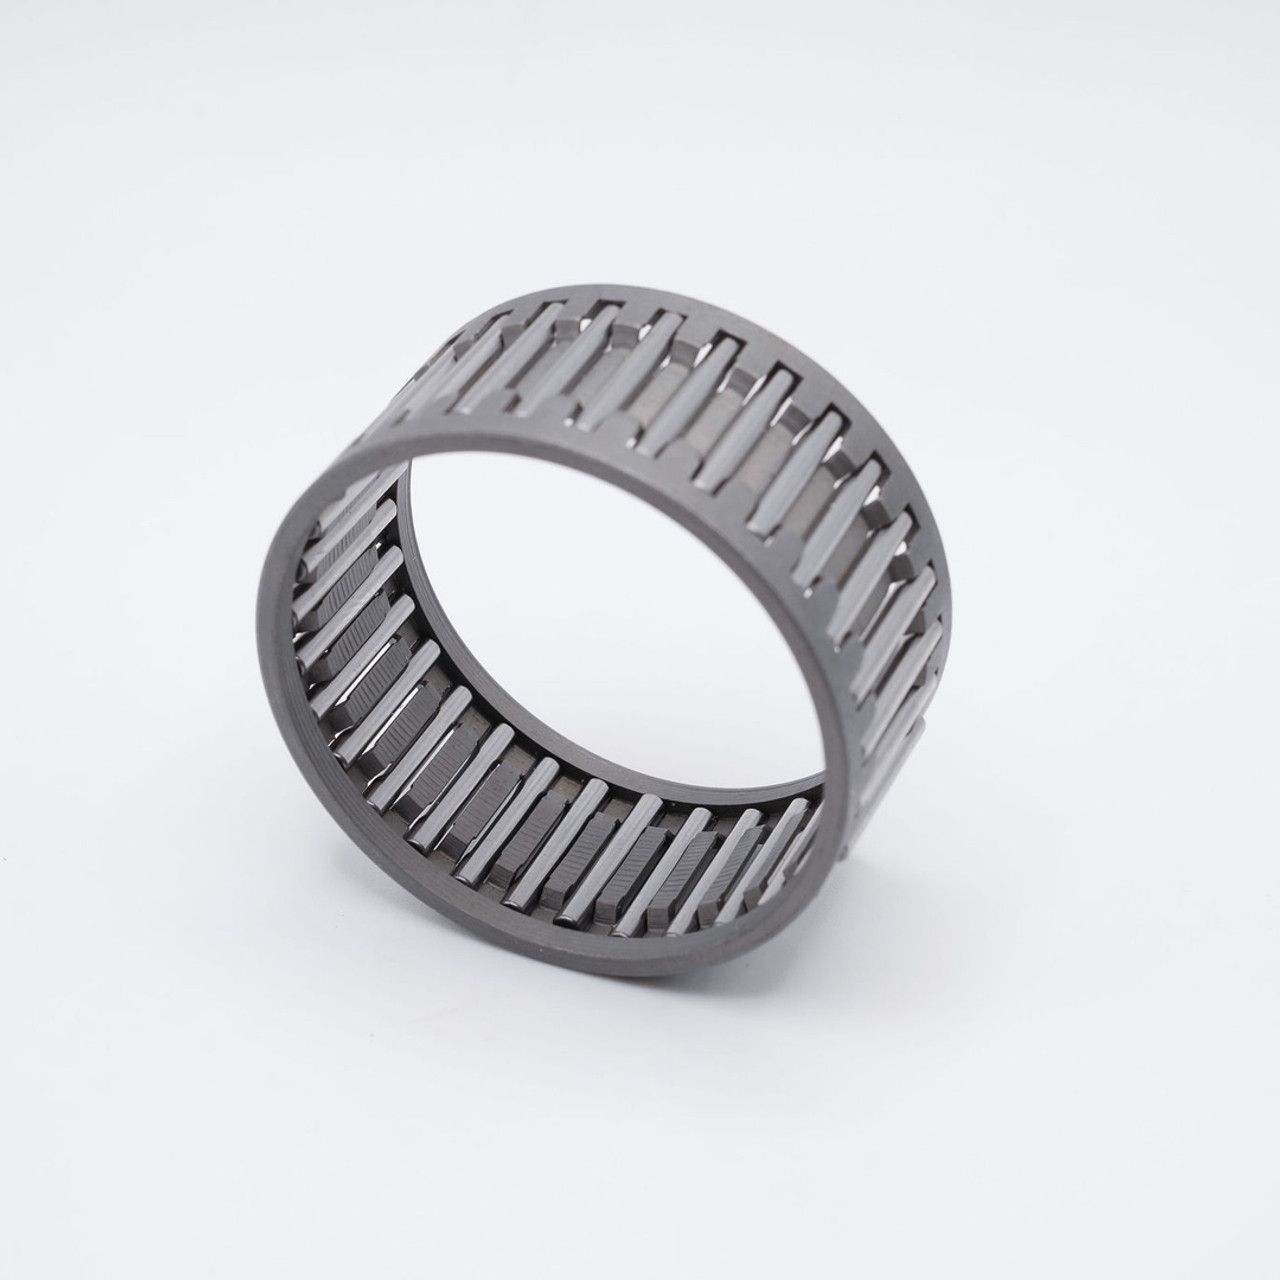 KT142017 Needle Roller Bearing 14x20x17mm Angled View